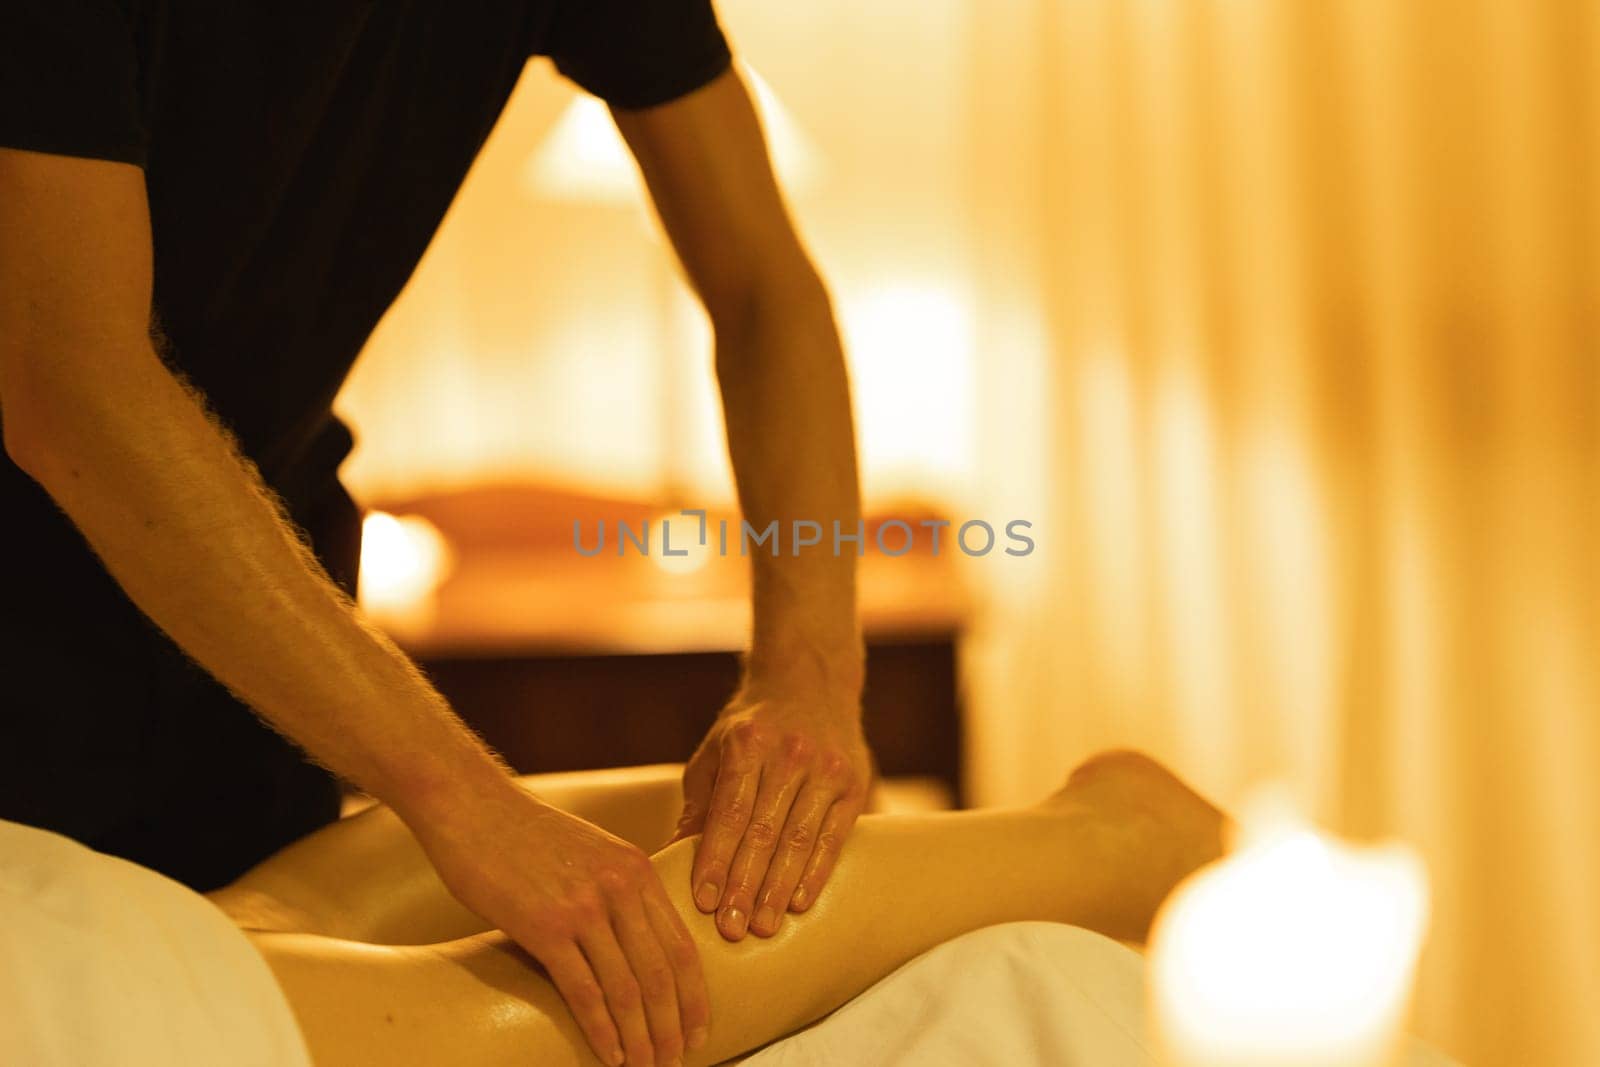 Massage in spa salon - a man massages the shin of his female client. Mid shot